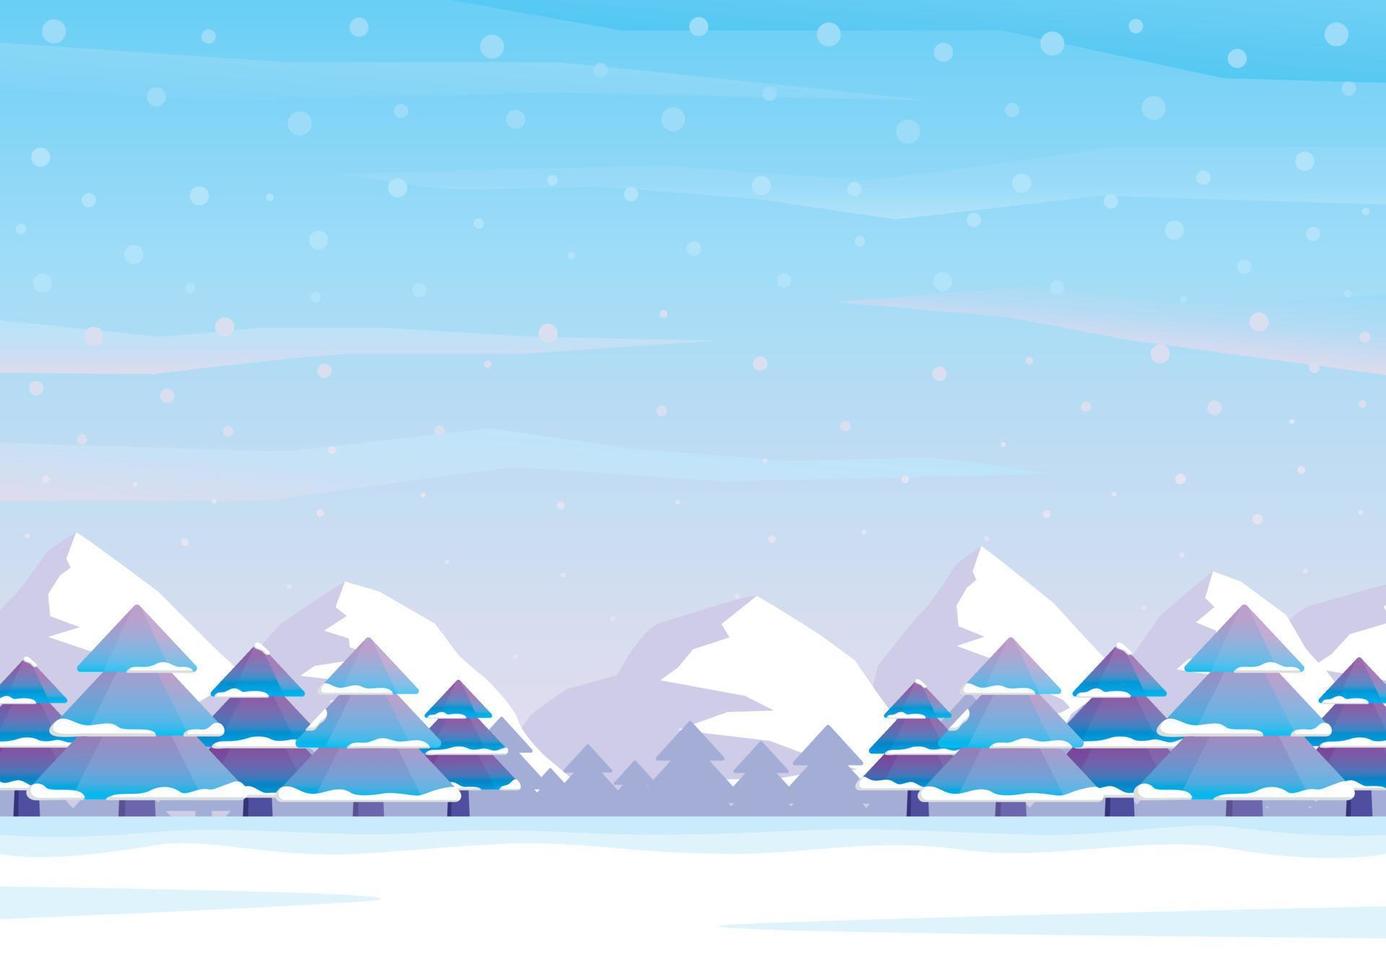 Winter background graphic vector in blue color theme.